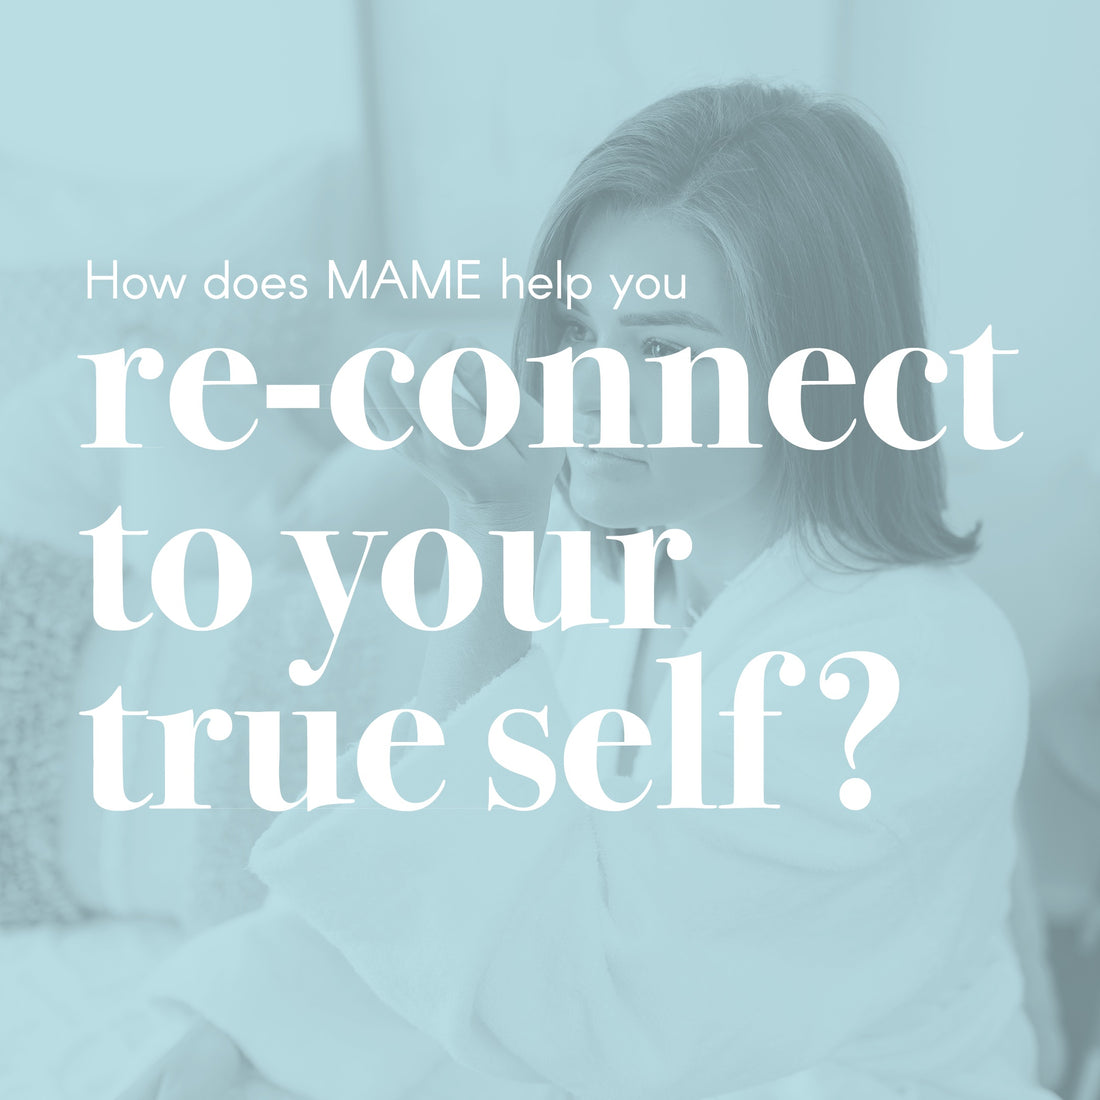 HOW MAME helps to reconnect to your true self...you may ask